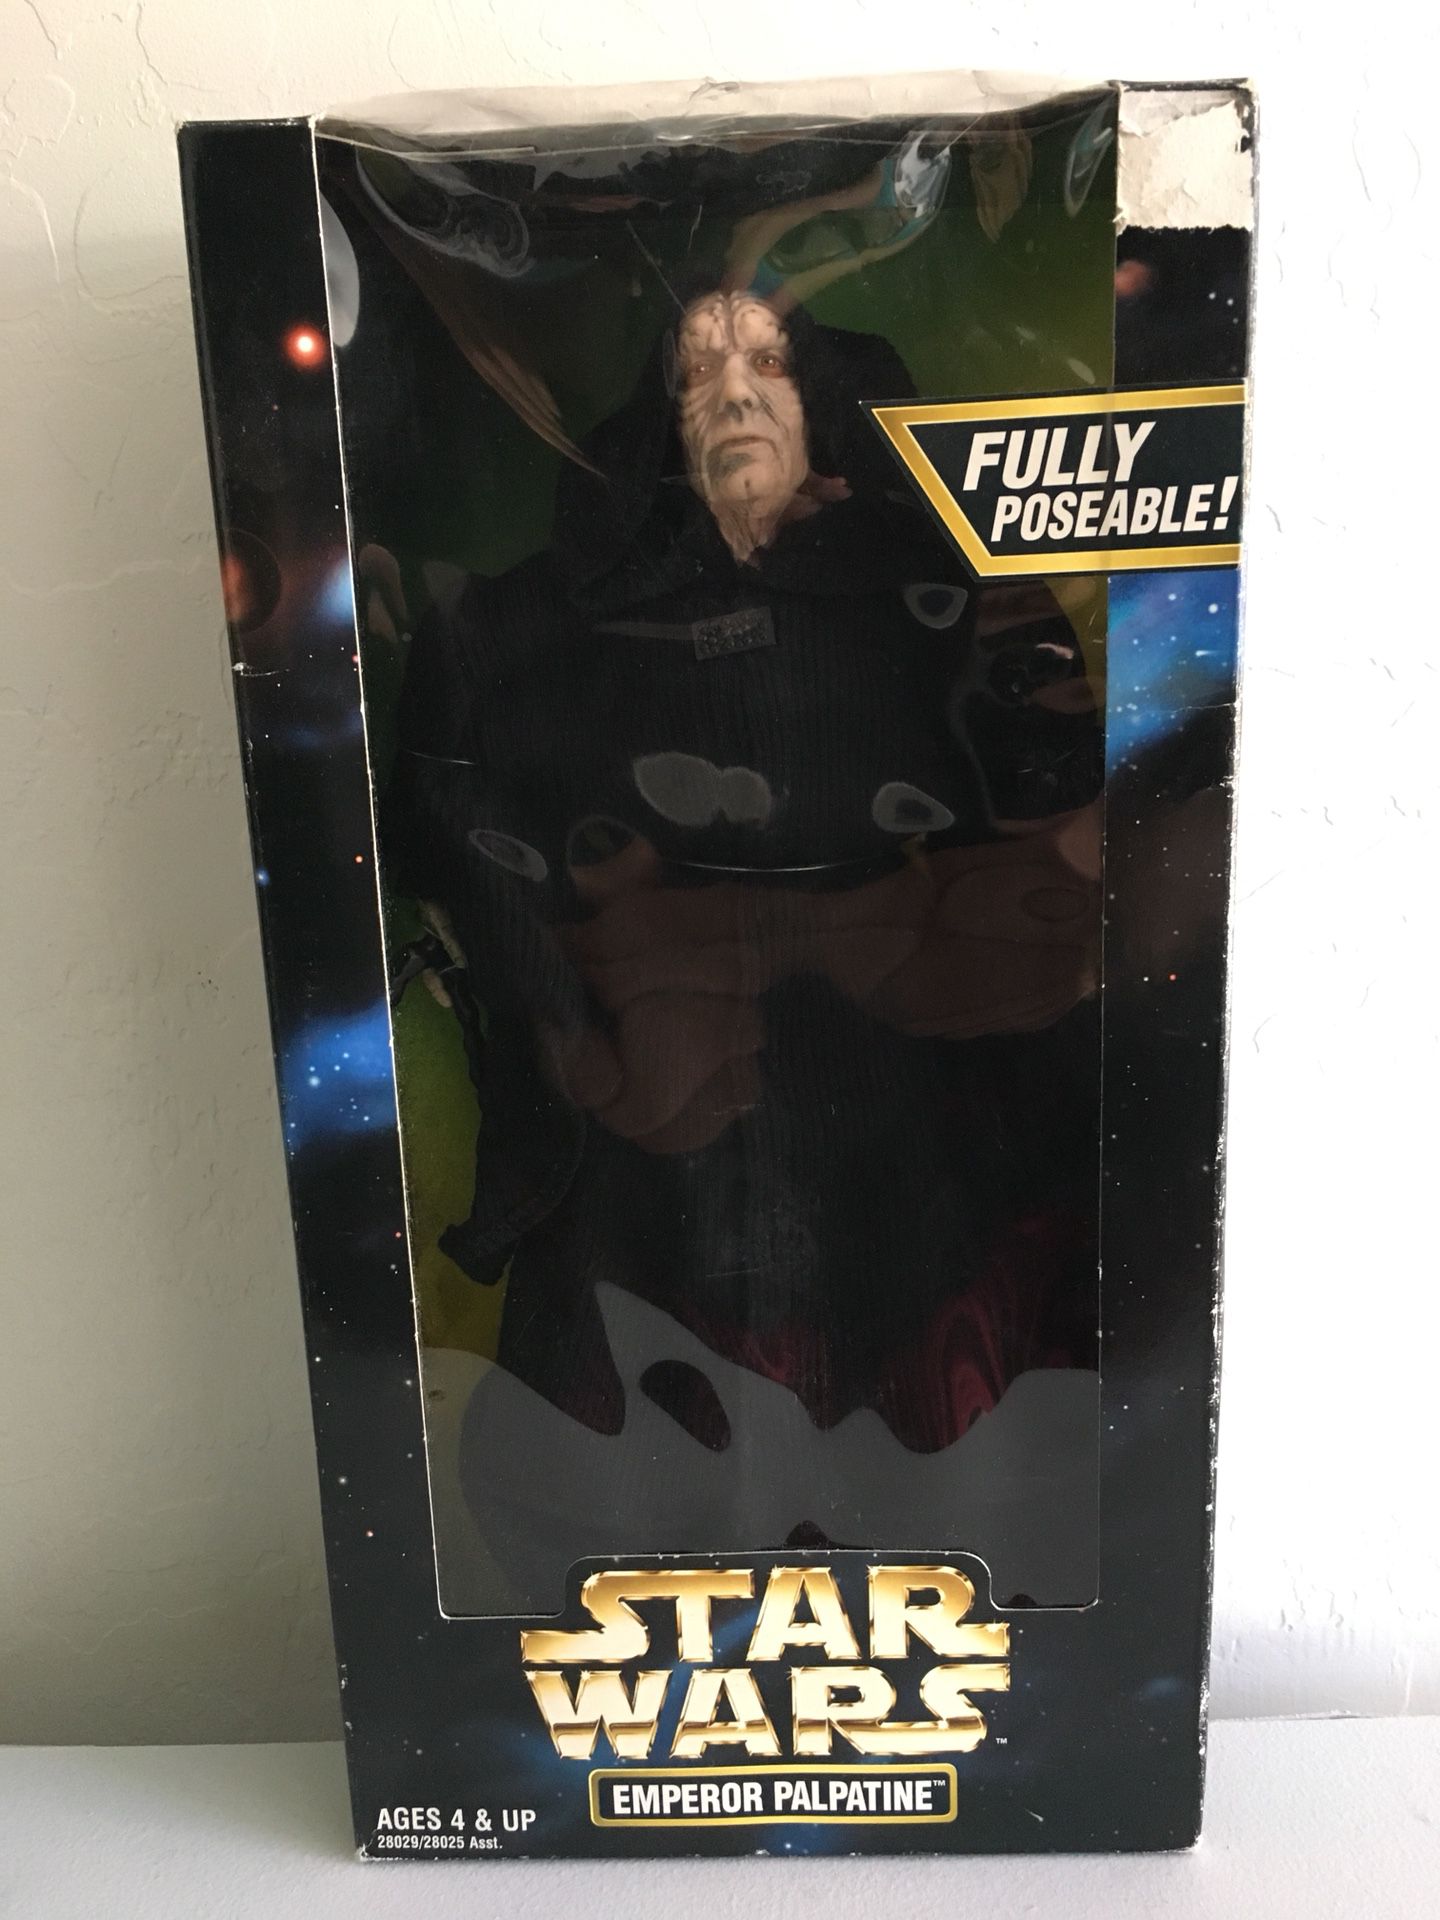 ($1) 12 inch Star Wars Emperor Palpatine Figure/ Doll/Toy Action Collection ©️1998 Hasbro Kenner.